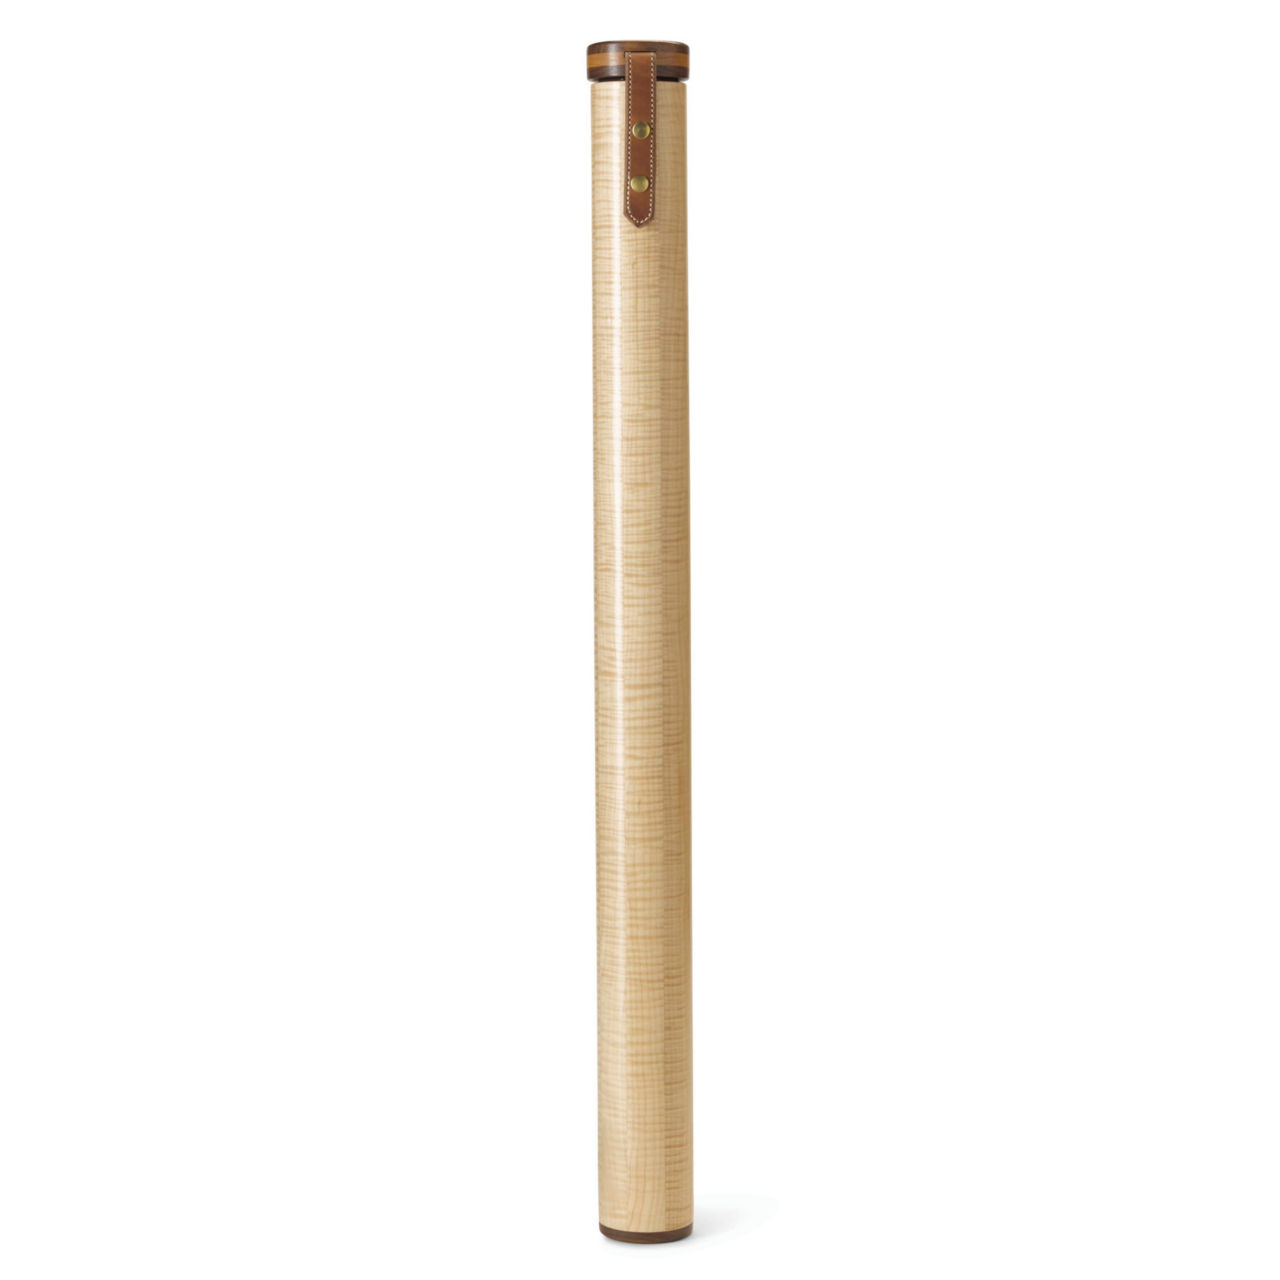 A.L. Swanson Wooden Fly Rod Tube